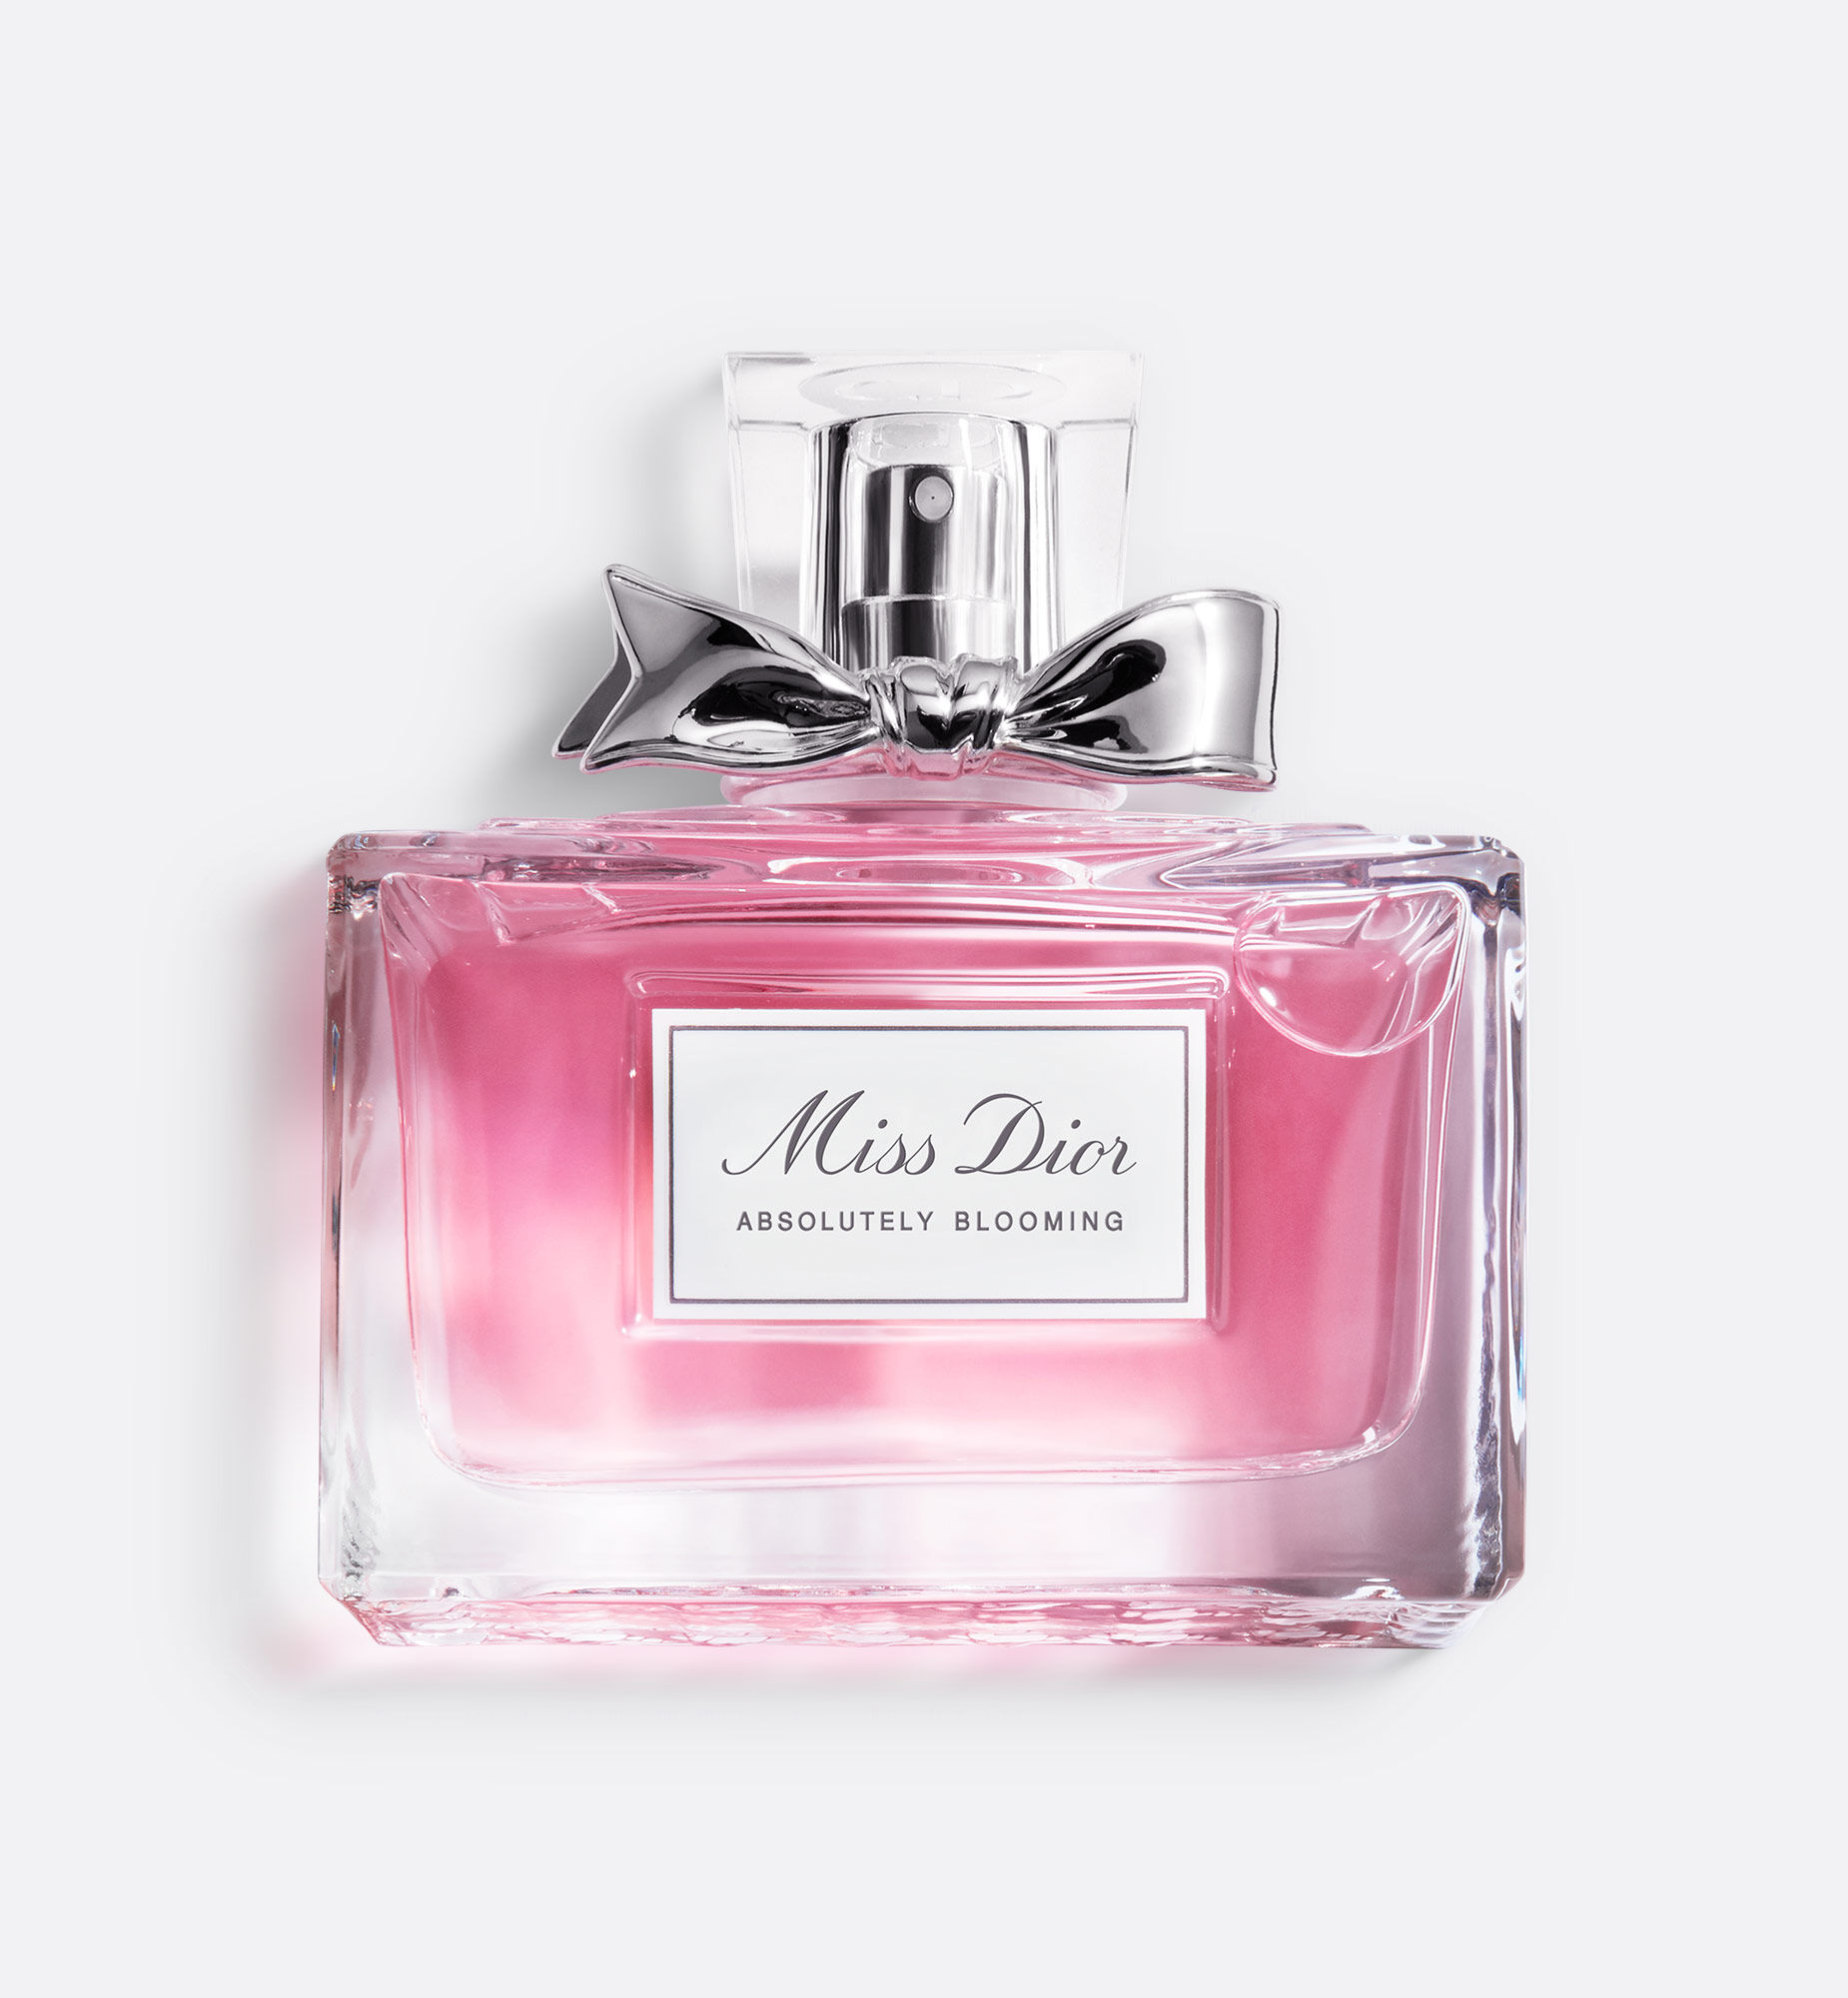 Miss Dior Absolutely Blooming: delectably floral Eau de